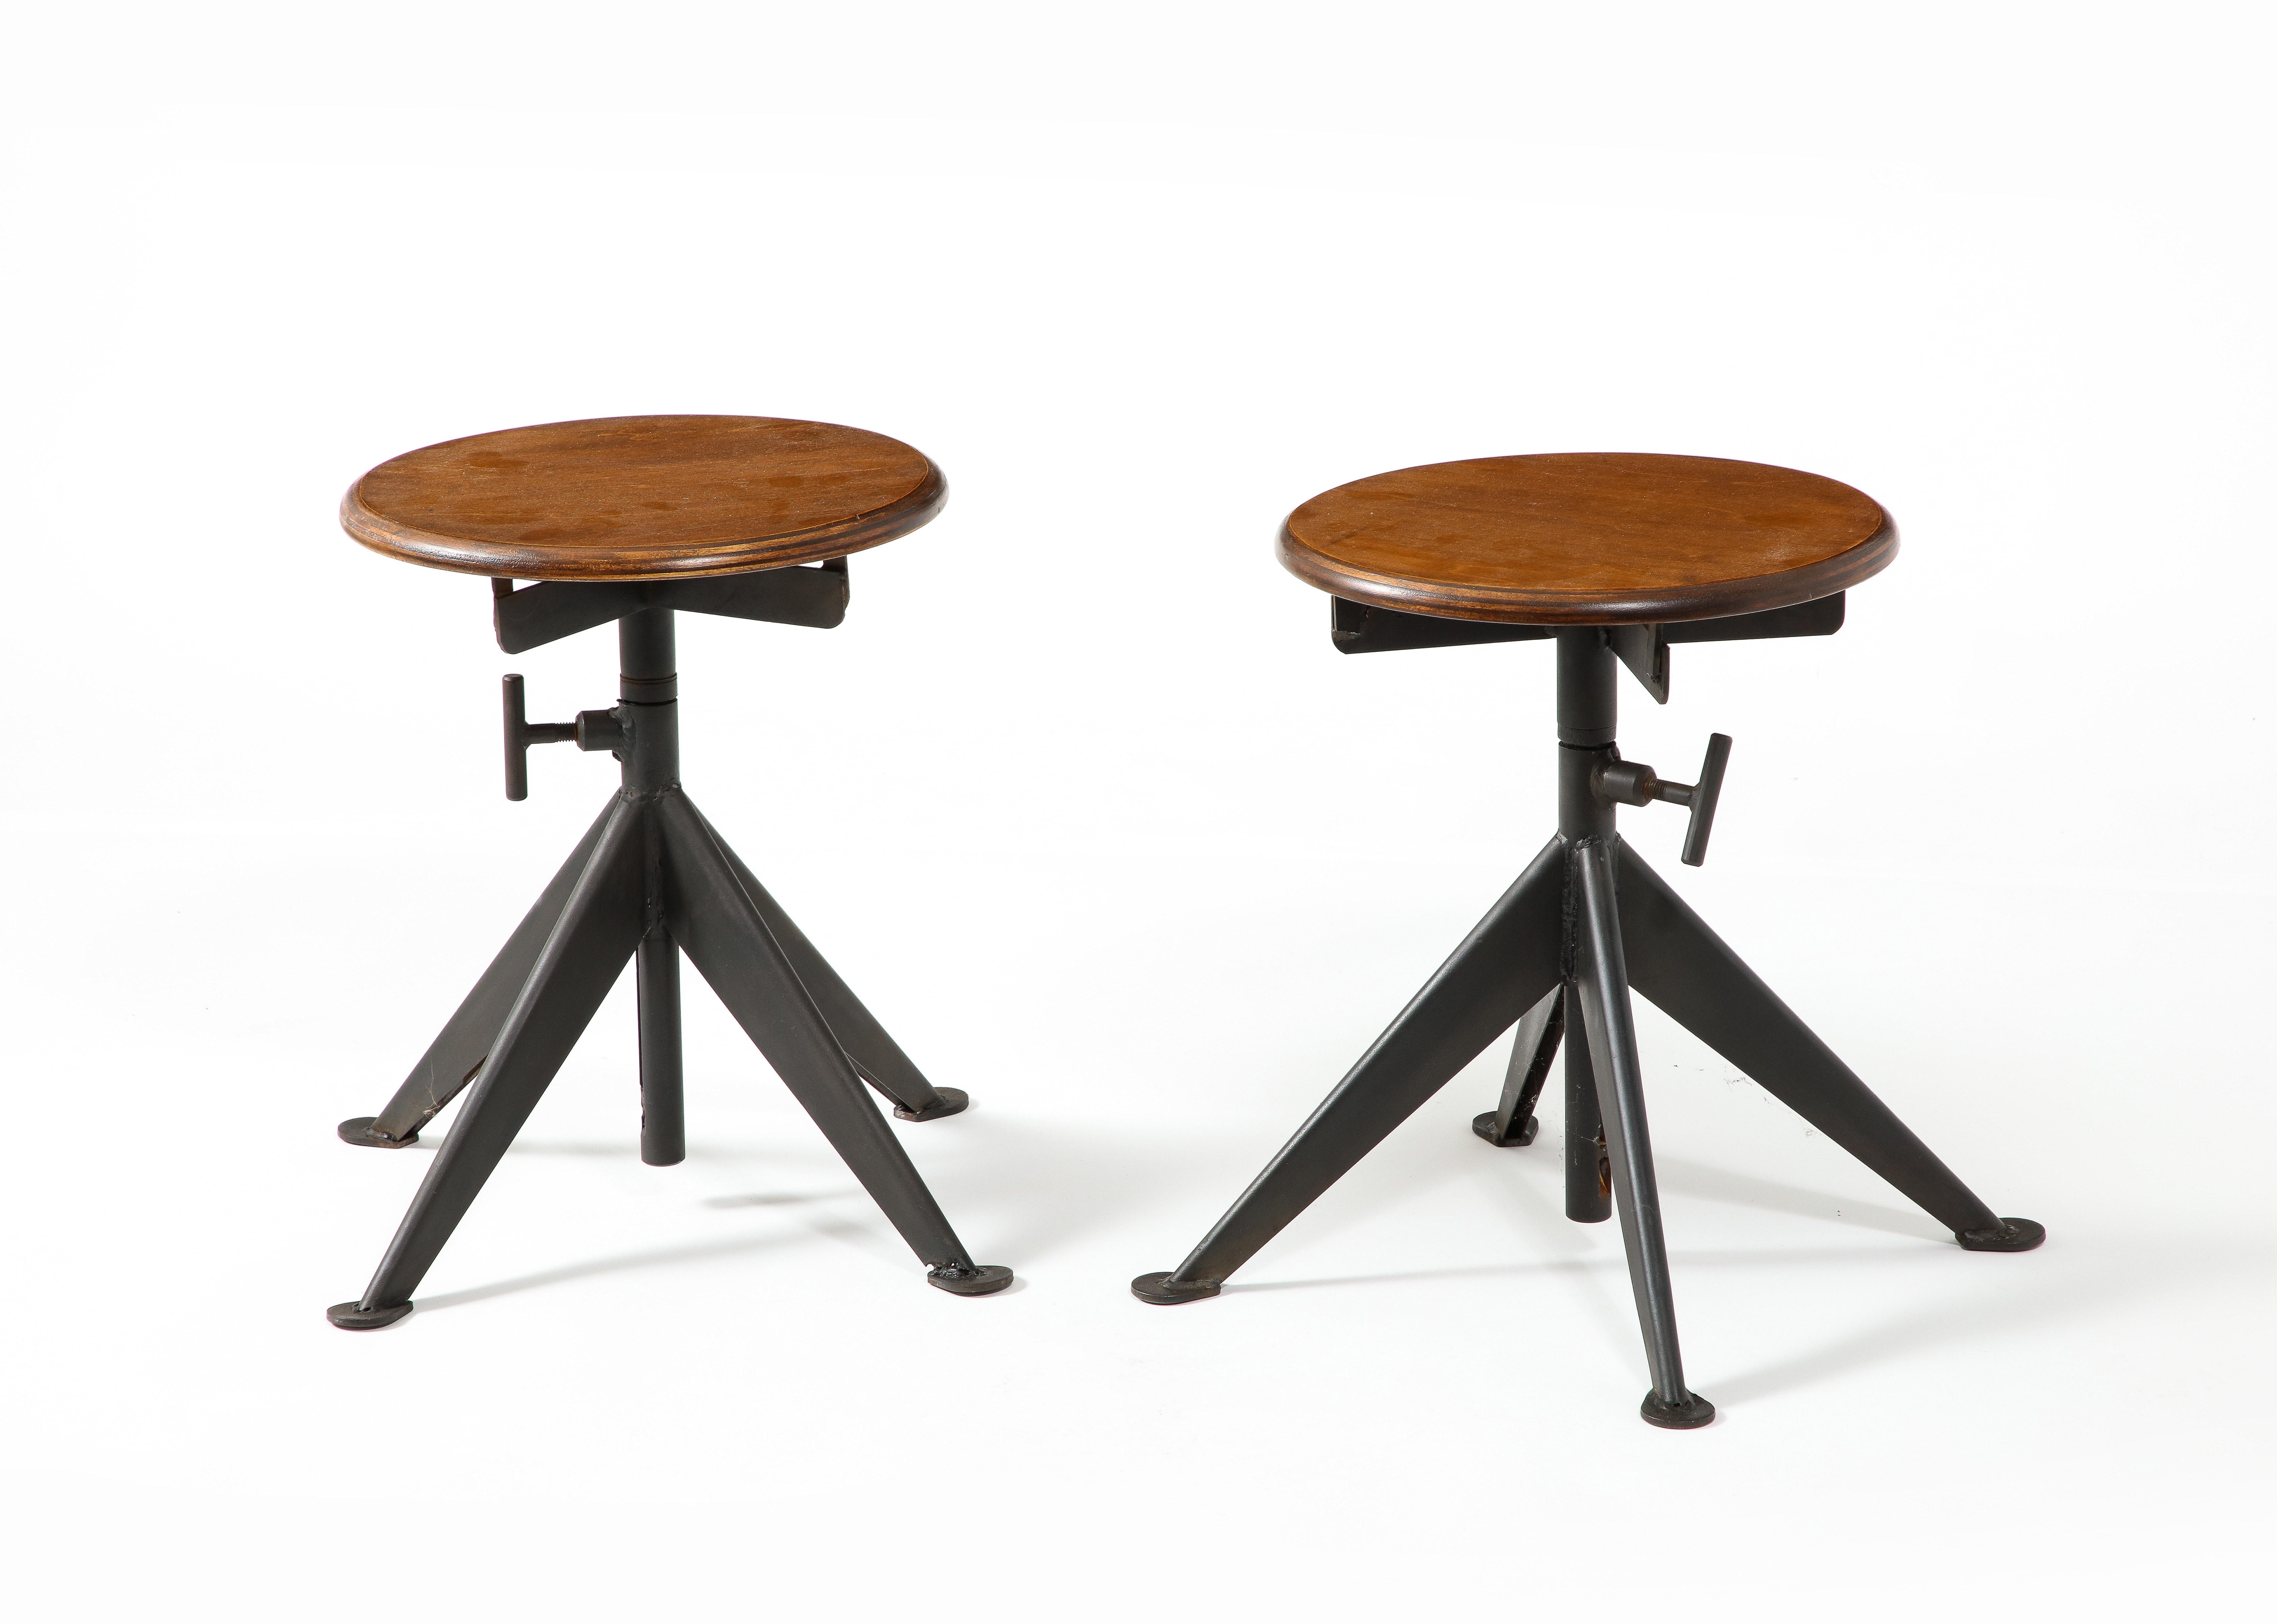 Brutalist Pair of Industrial Steel & Ply Swedish Stools, Sweden 1950's For Sale